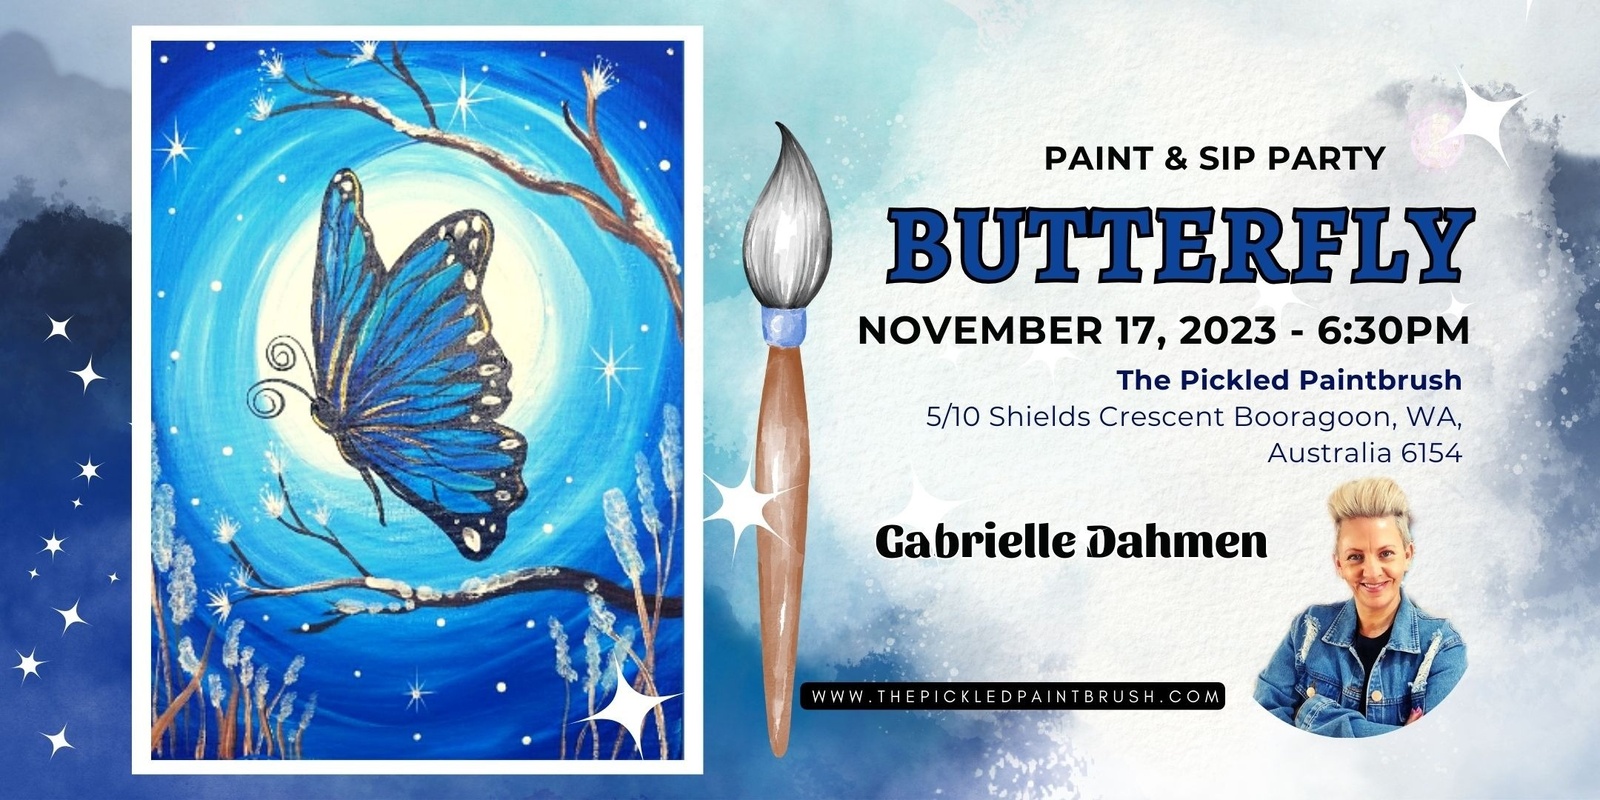 Banner image for Paint & Sip Party - Butterfly - November 17, 2023